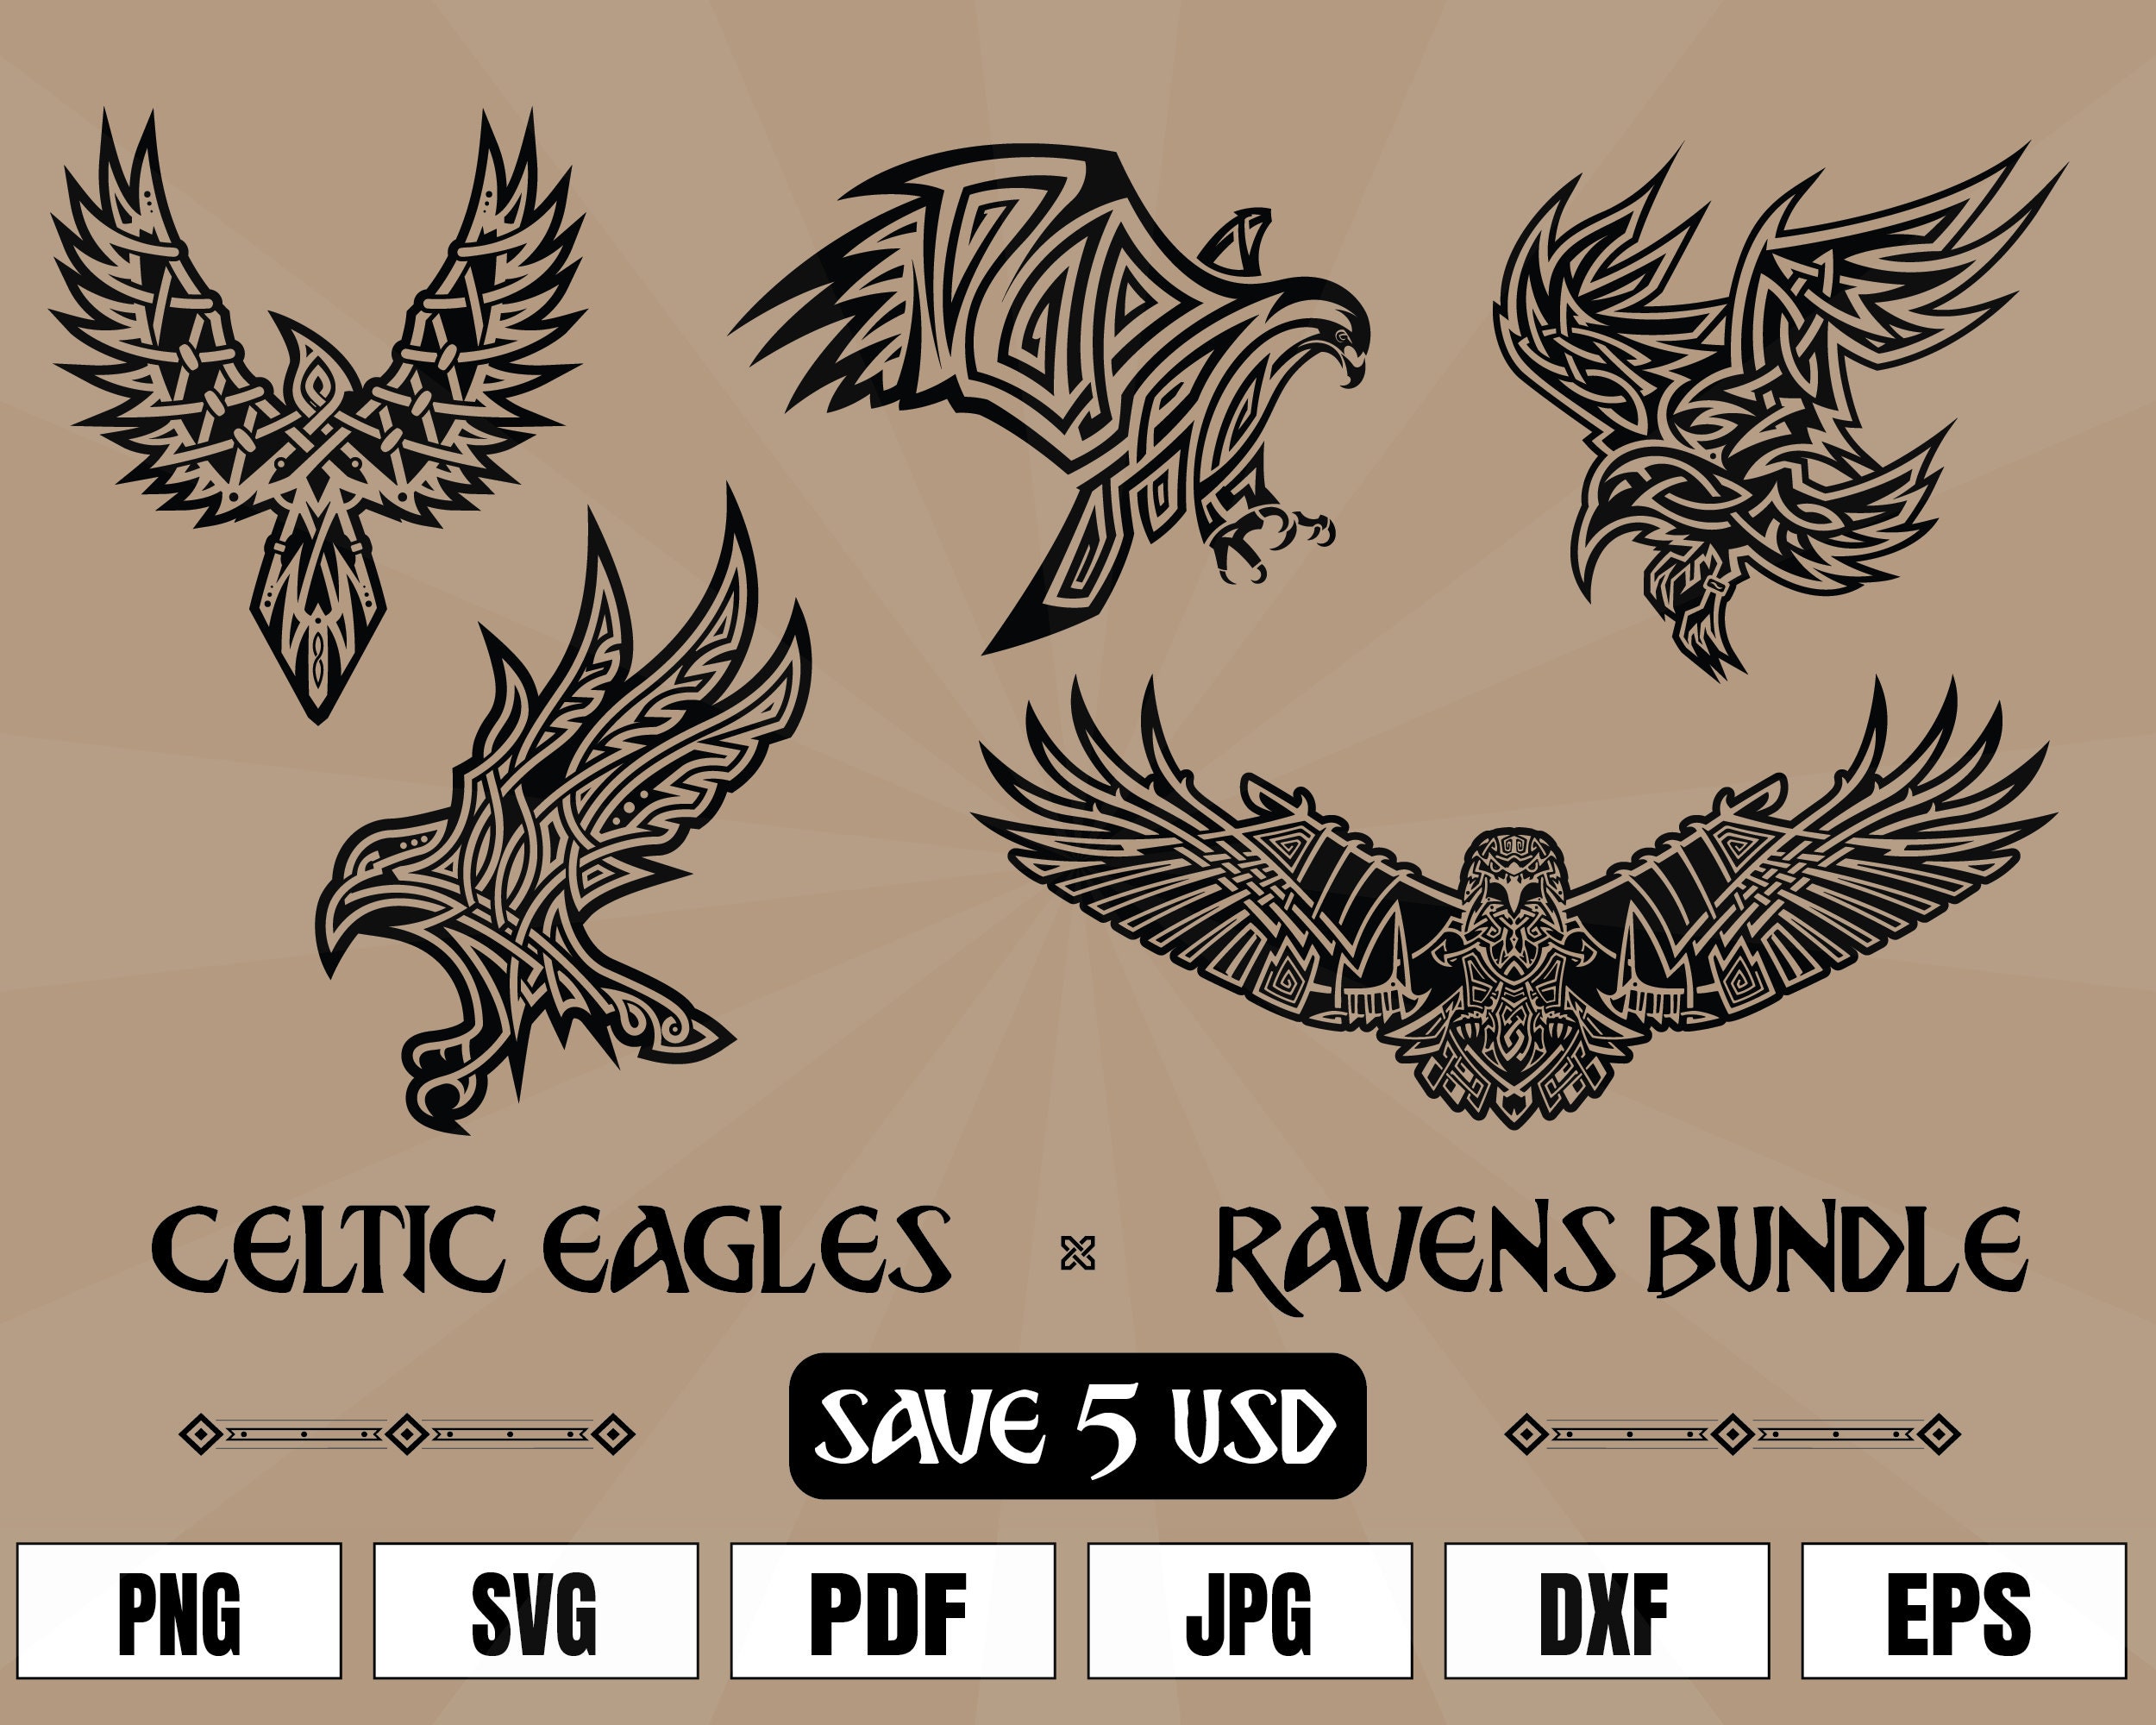 Celtic Eagle Raven Viking Tattoo Logo Art .svg .png Vector for Digital &  Printing Projects T-shirts, Coffee Mugs, Posters, Stickers - Etsy